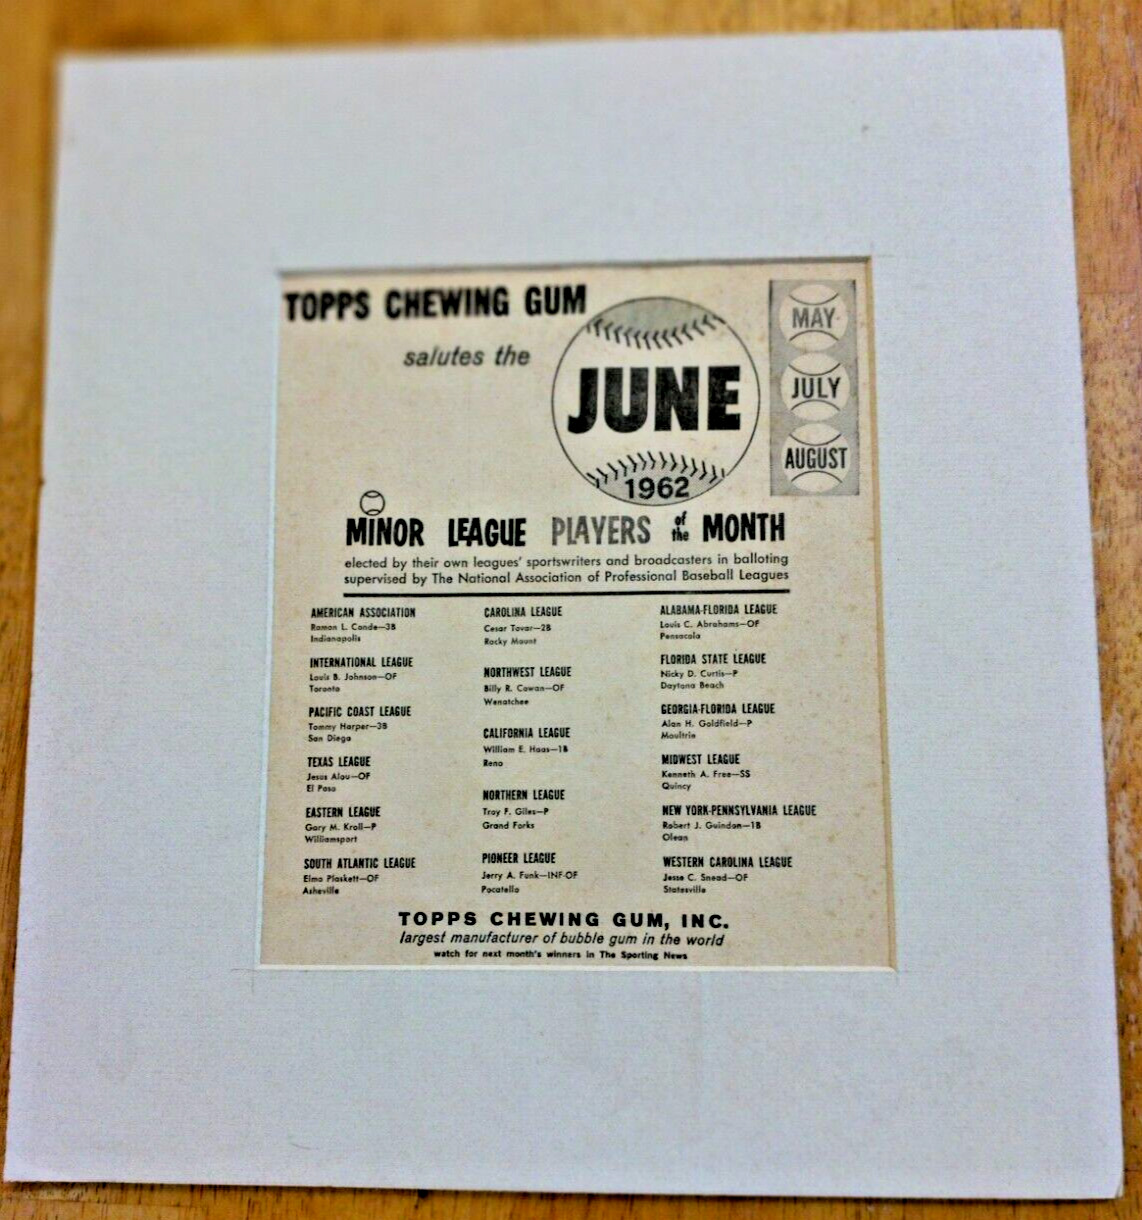 Vintage June 1962 Topps Chewing Gum Salutes Minor League Players Print Ad Matted